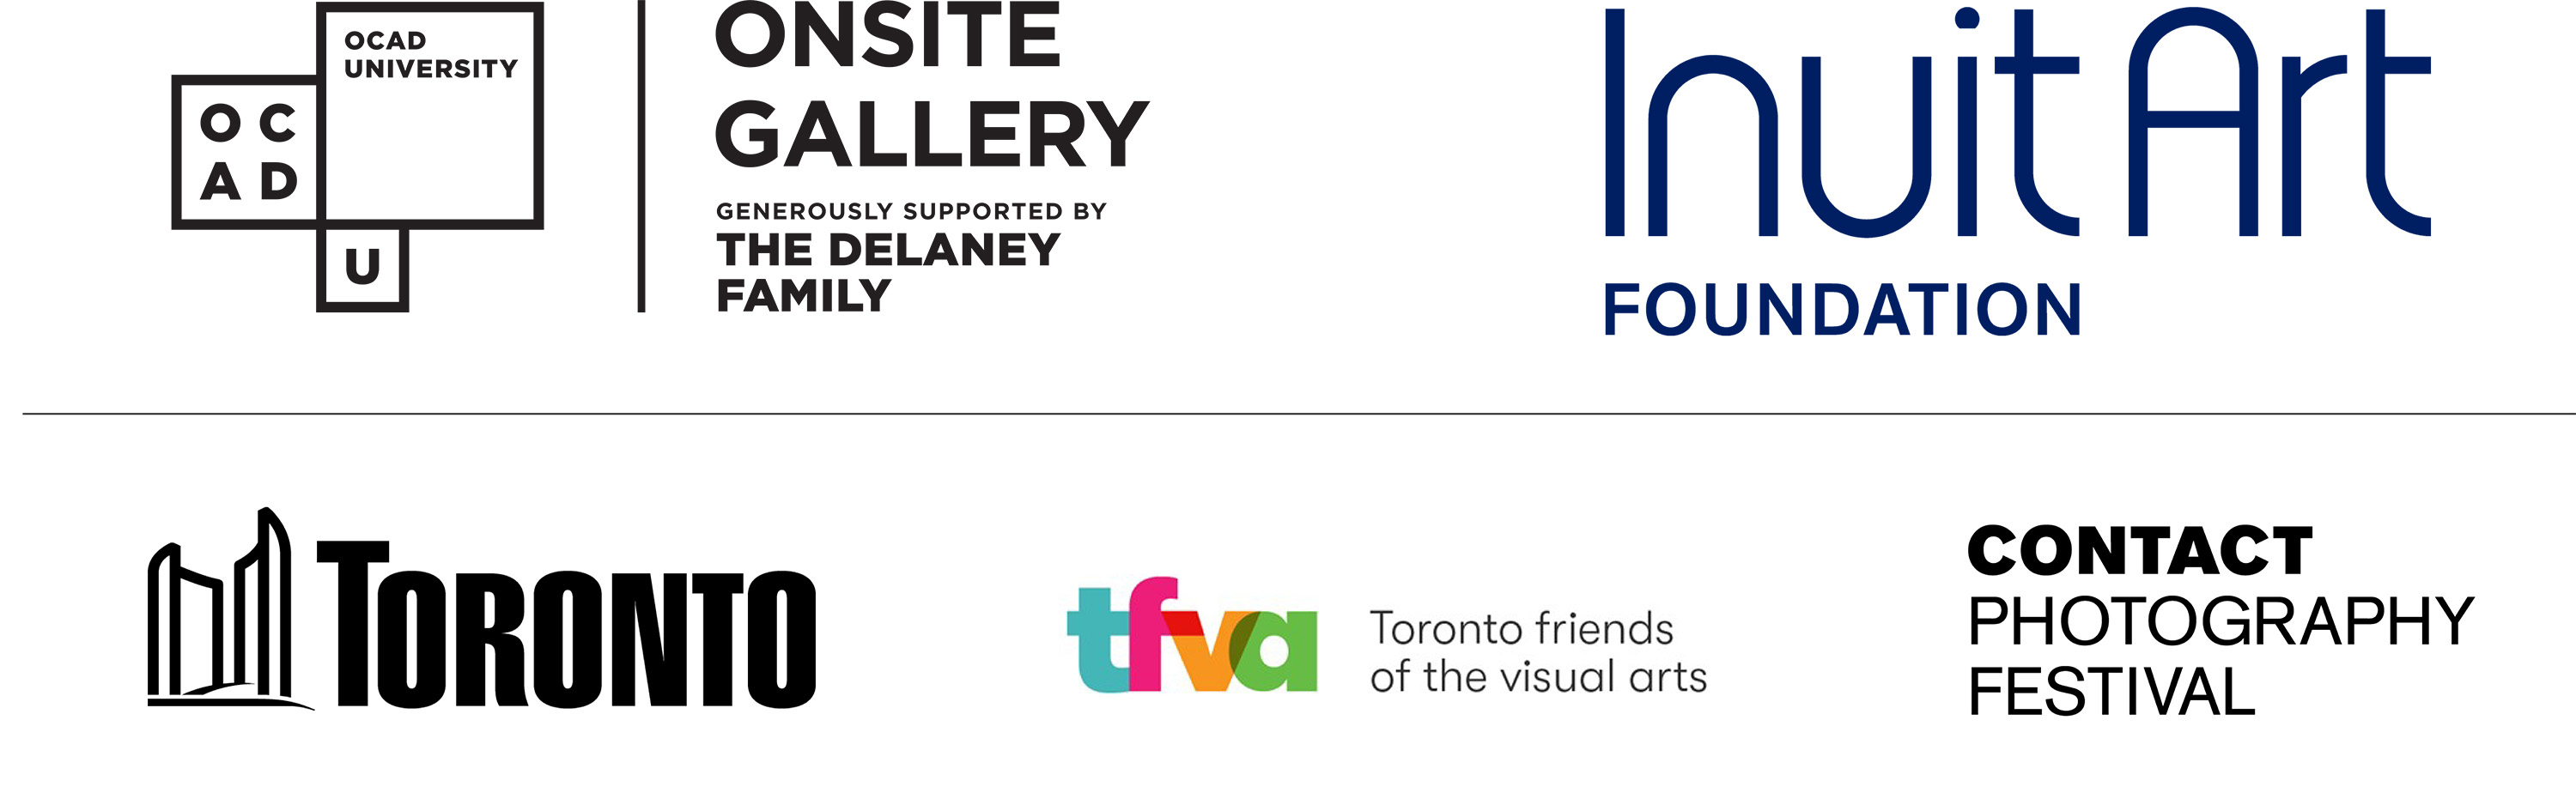 Onsite Gallery, OCAD University, Generously Supported by The Delaney Family. Inuit Art Foundation. City of Toronto, Toronto Friends of the Visual Arts, Contact Photography Festival. 